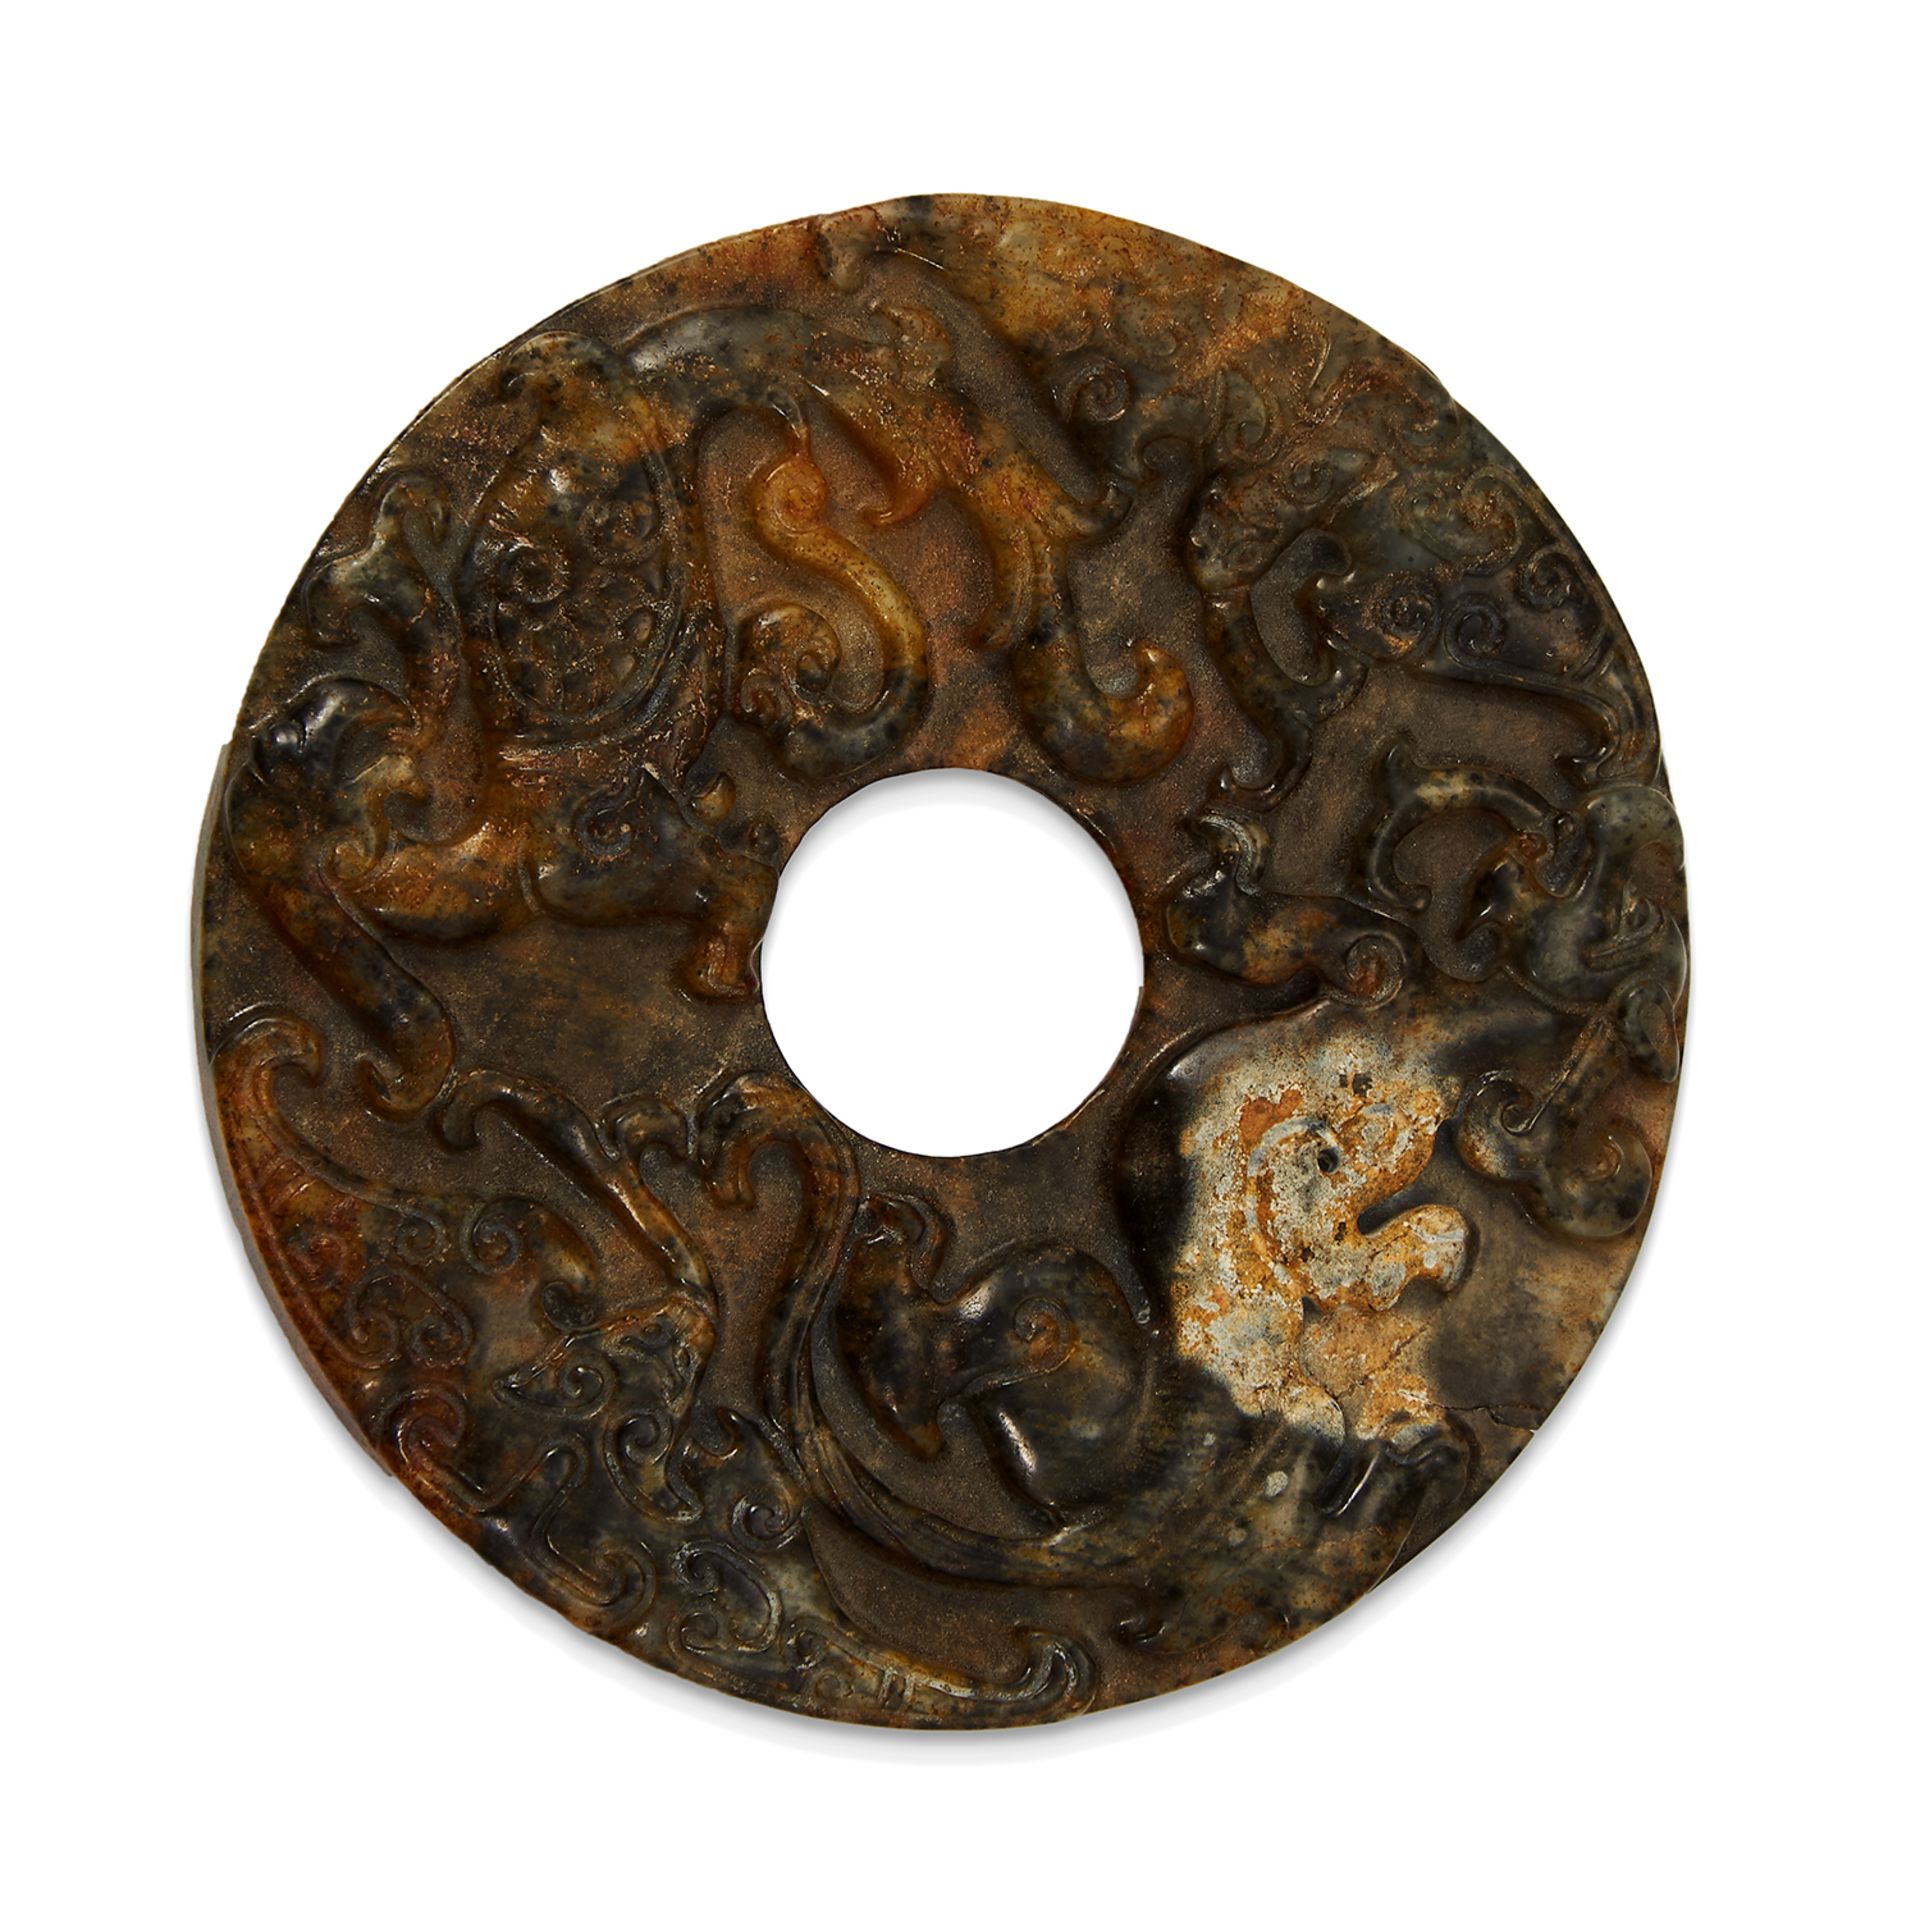 A CHINESE JADE DISC of circular form carved in high relief depicting various animals within